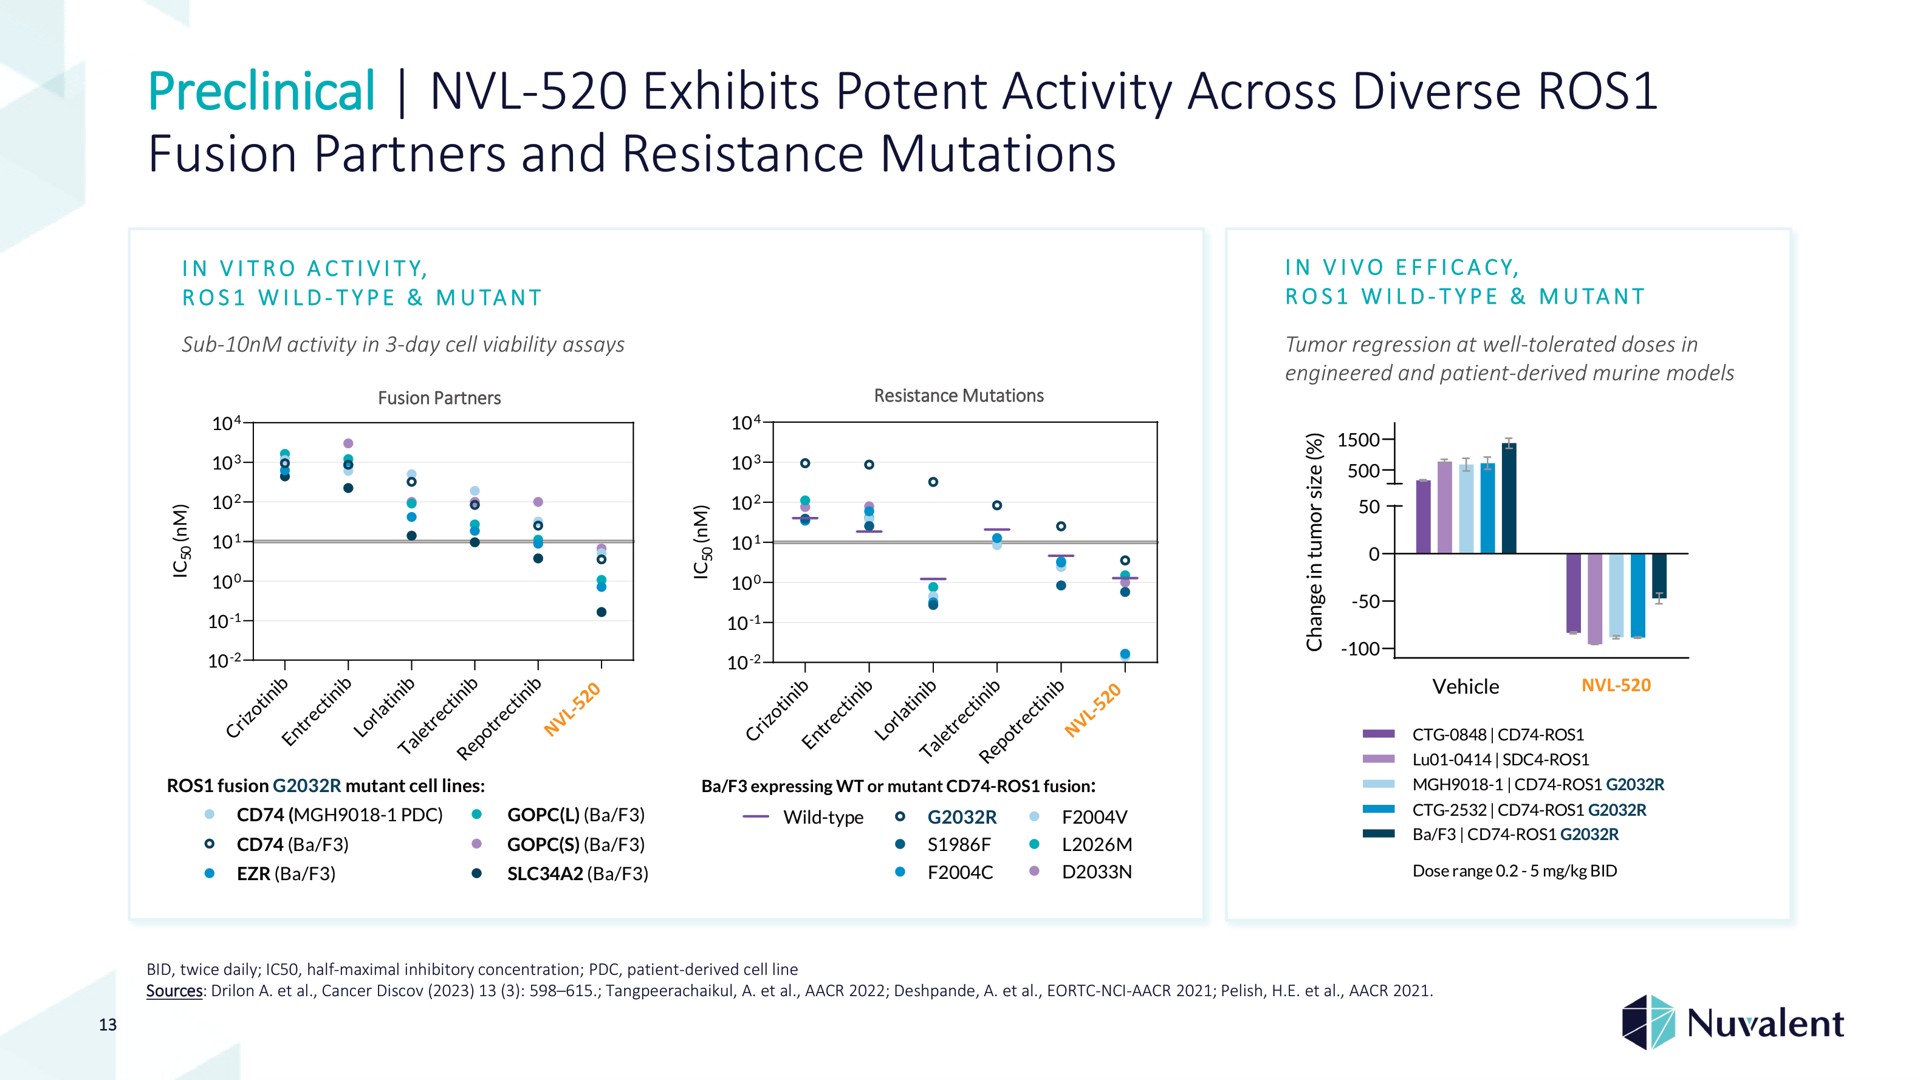 preclinical exhibits potent activity across diverse fusion partners and resistance mutations | Nuvalent